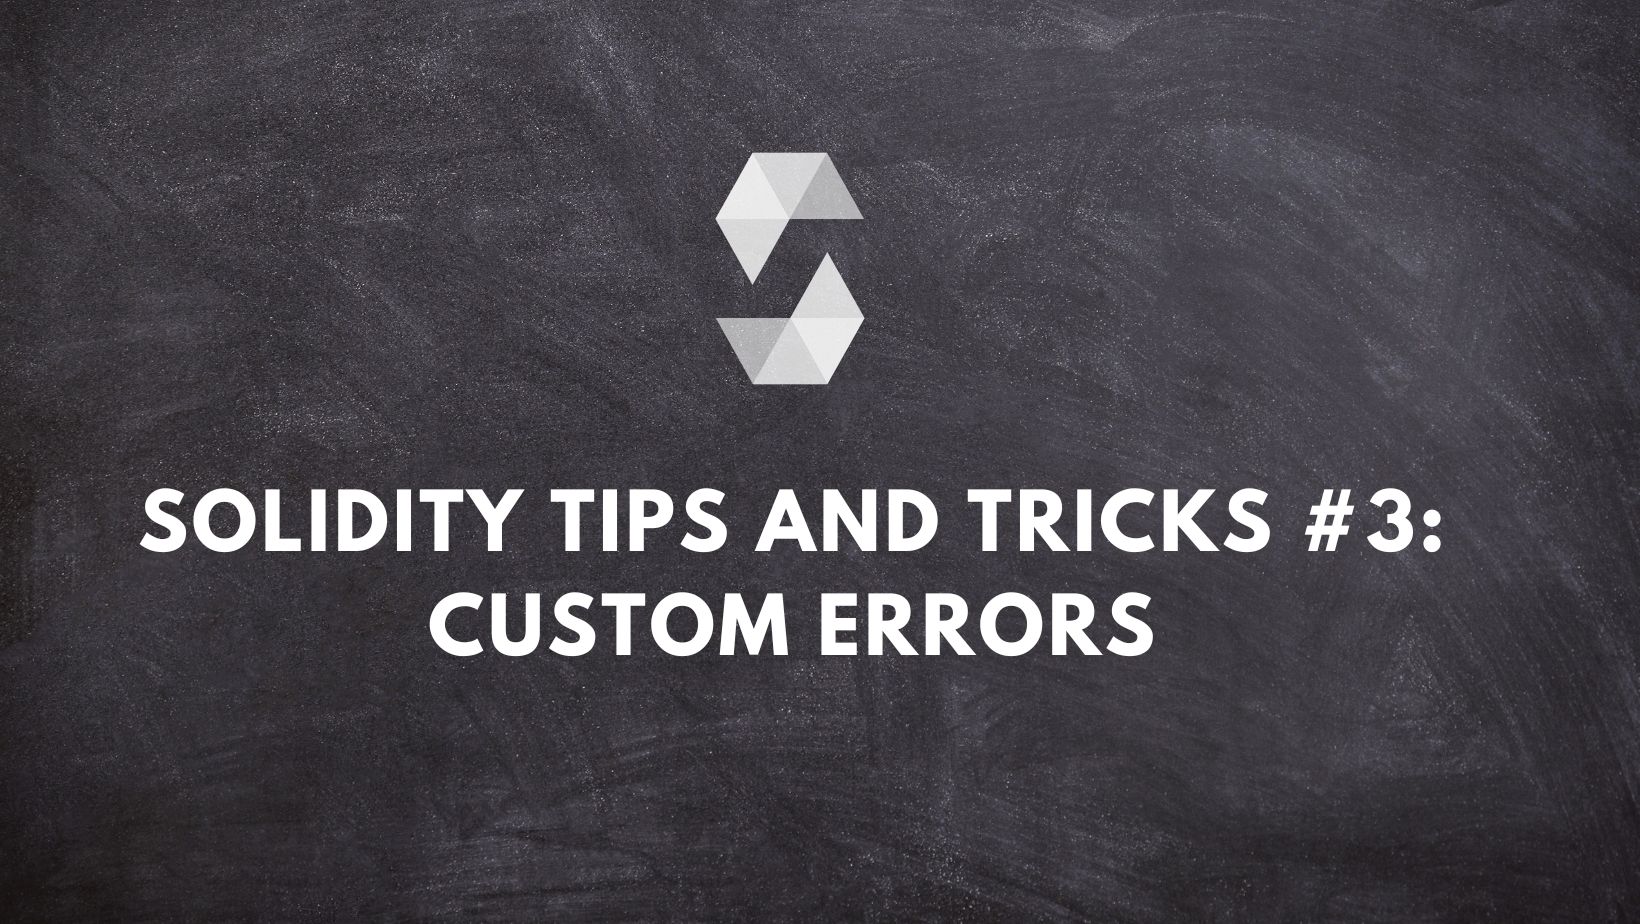 Solidity tips and tricks #3: Custom errors